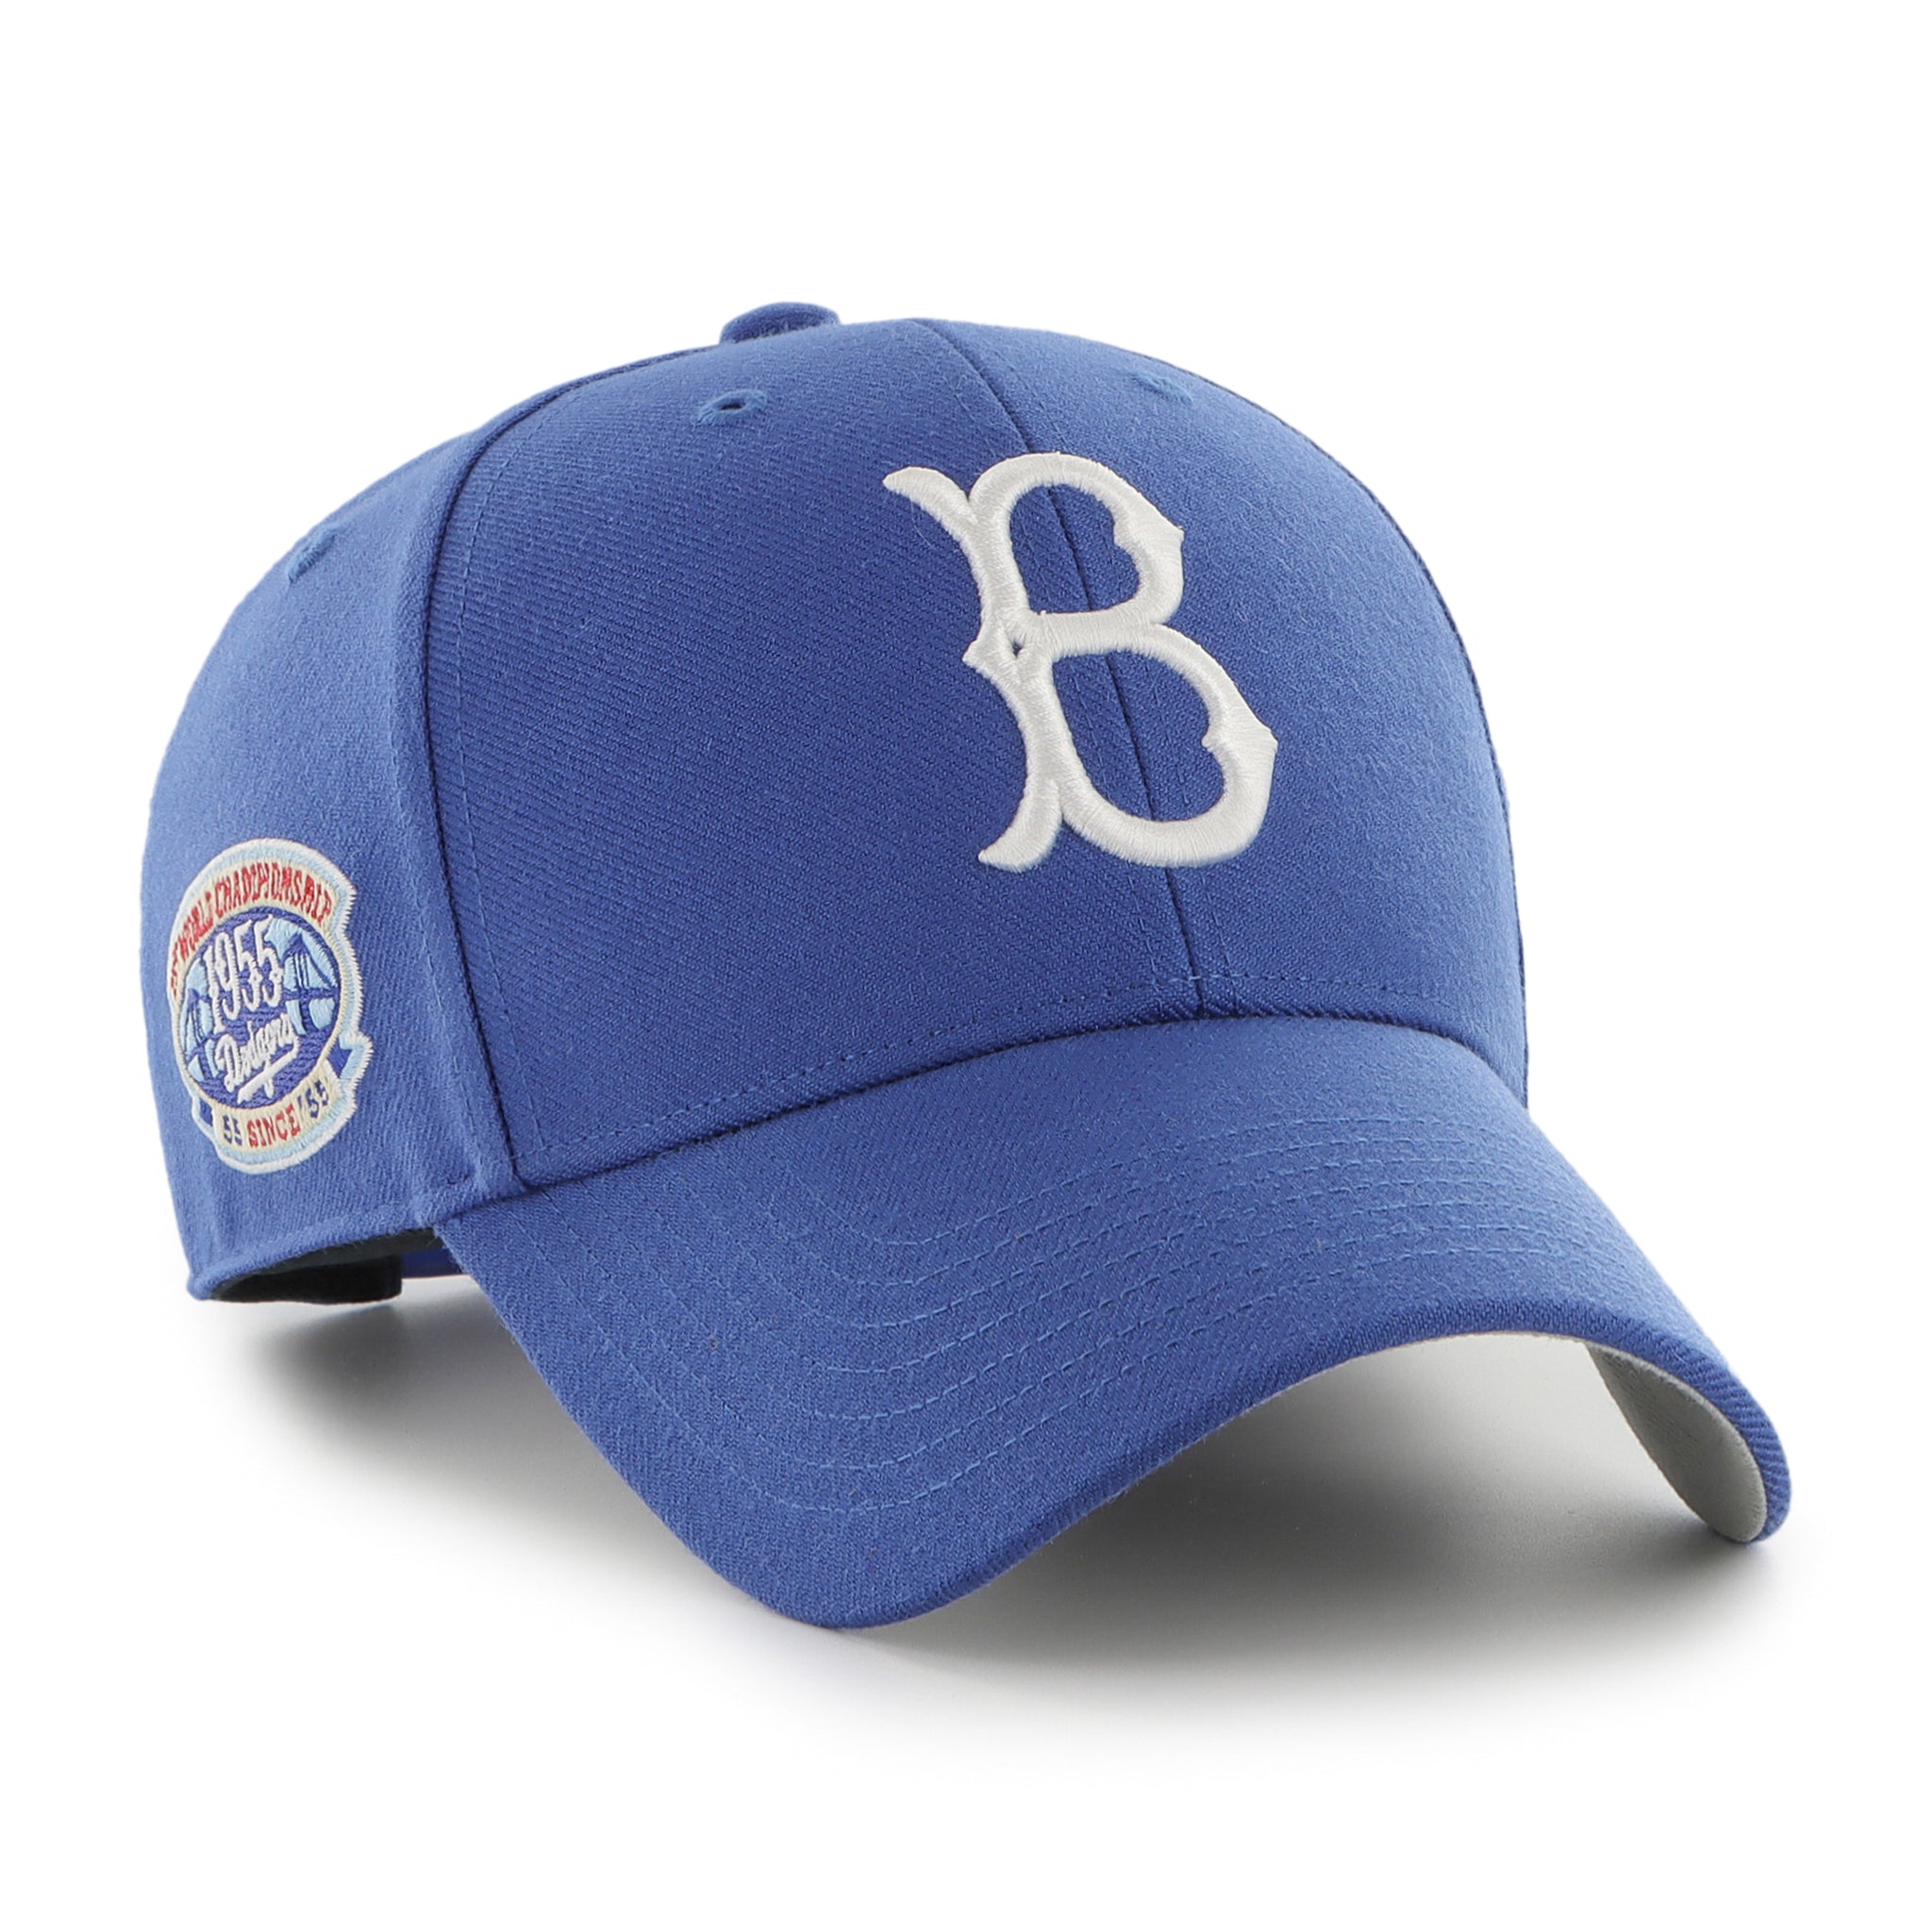 Men's '47 Brand Brooklyn Dodgers 1949 All Star Game Patch Cooperstown  Collection Sure Shot Royal Snapback Adjustable Cap